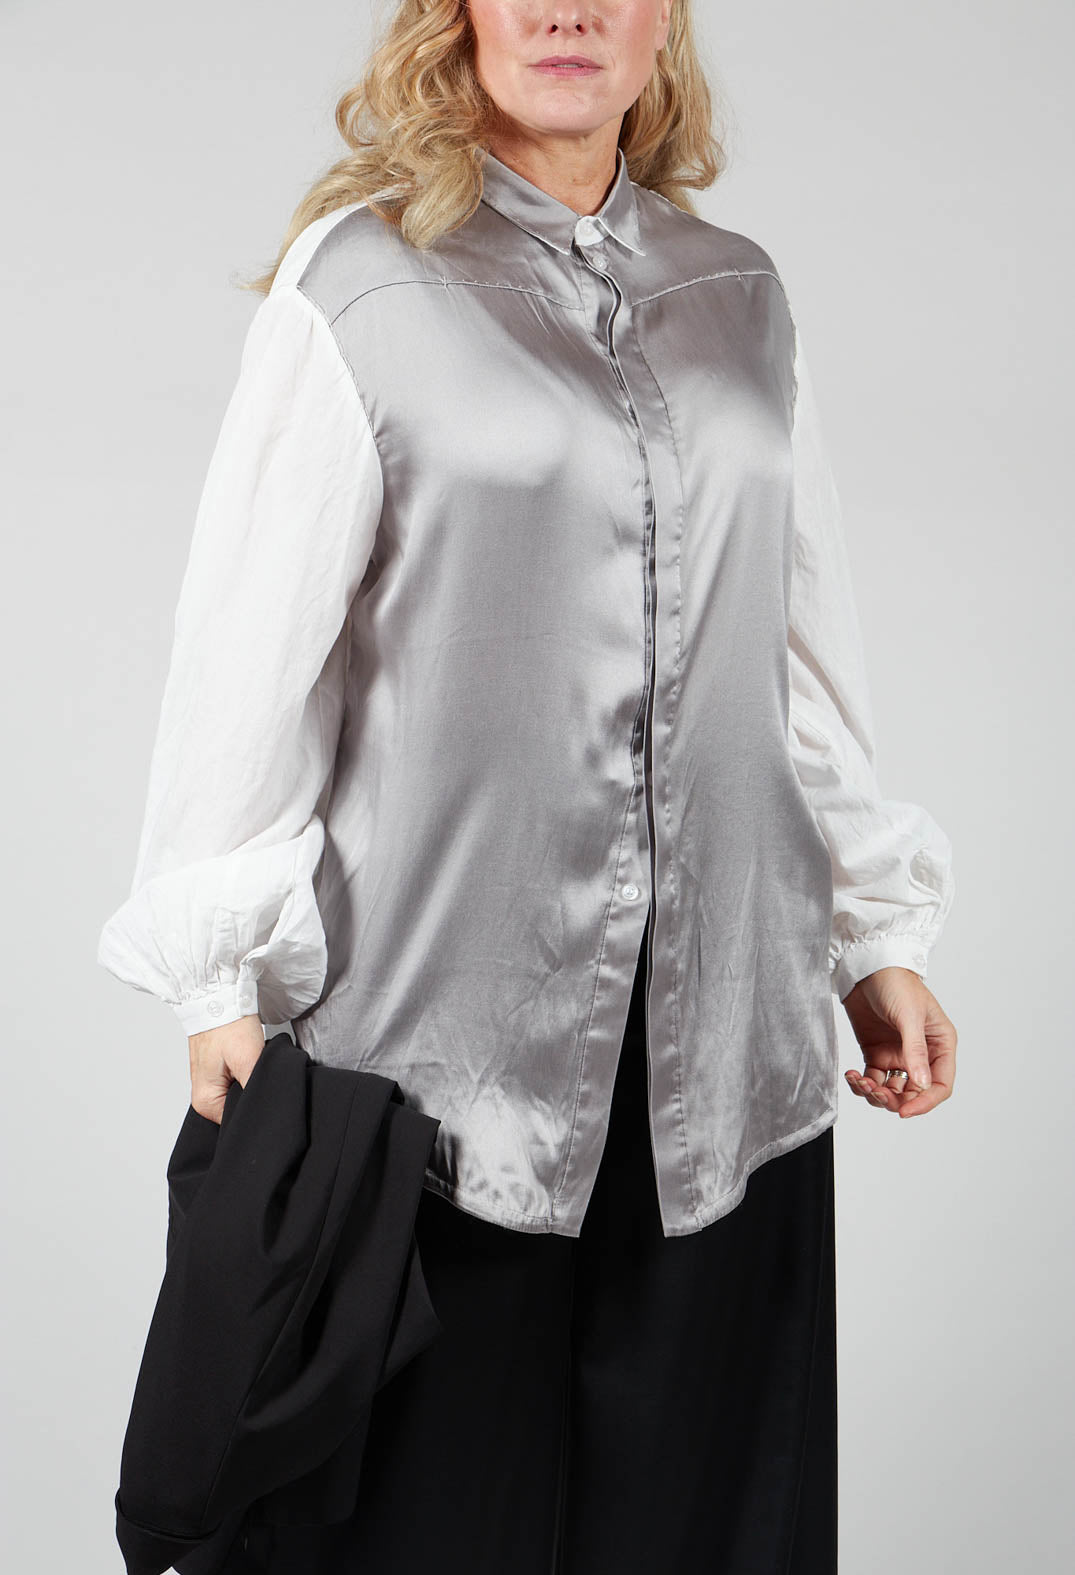 Loose Fit Shirt with Contrasting Arms In White and Grey